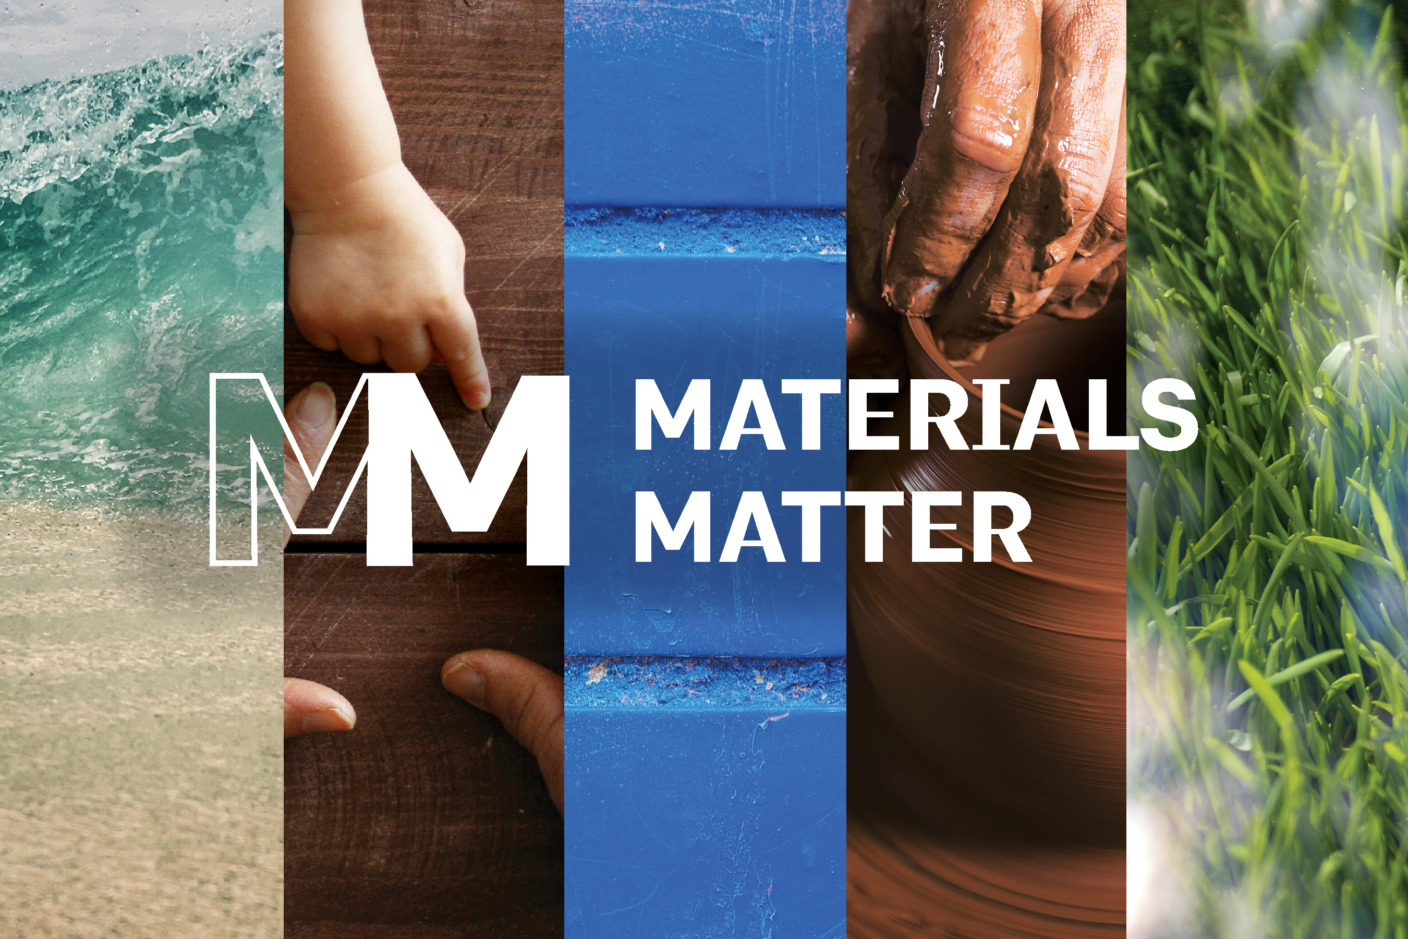 Materials Matter is a five-session series delivering comprehensive, high-level knowledge and strategies for assessing and selecting healthy, sustainable materials.